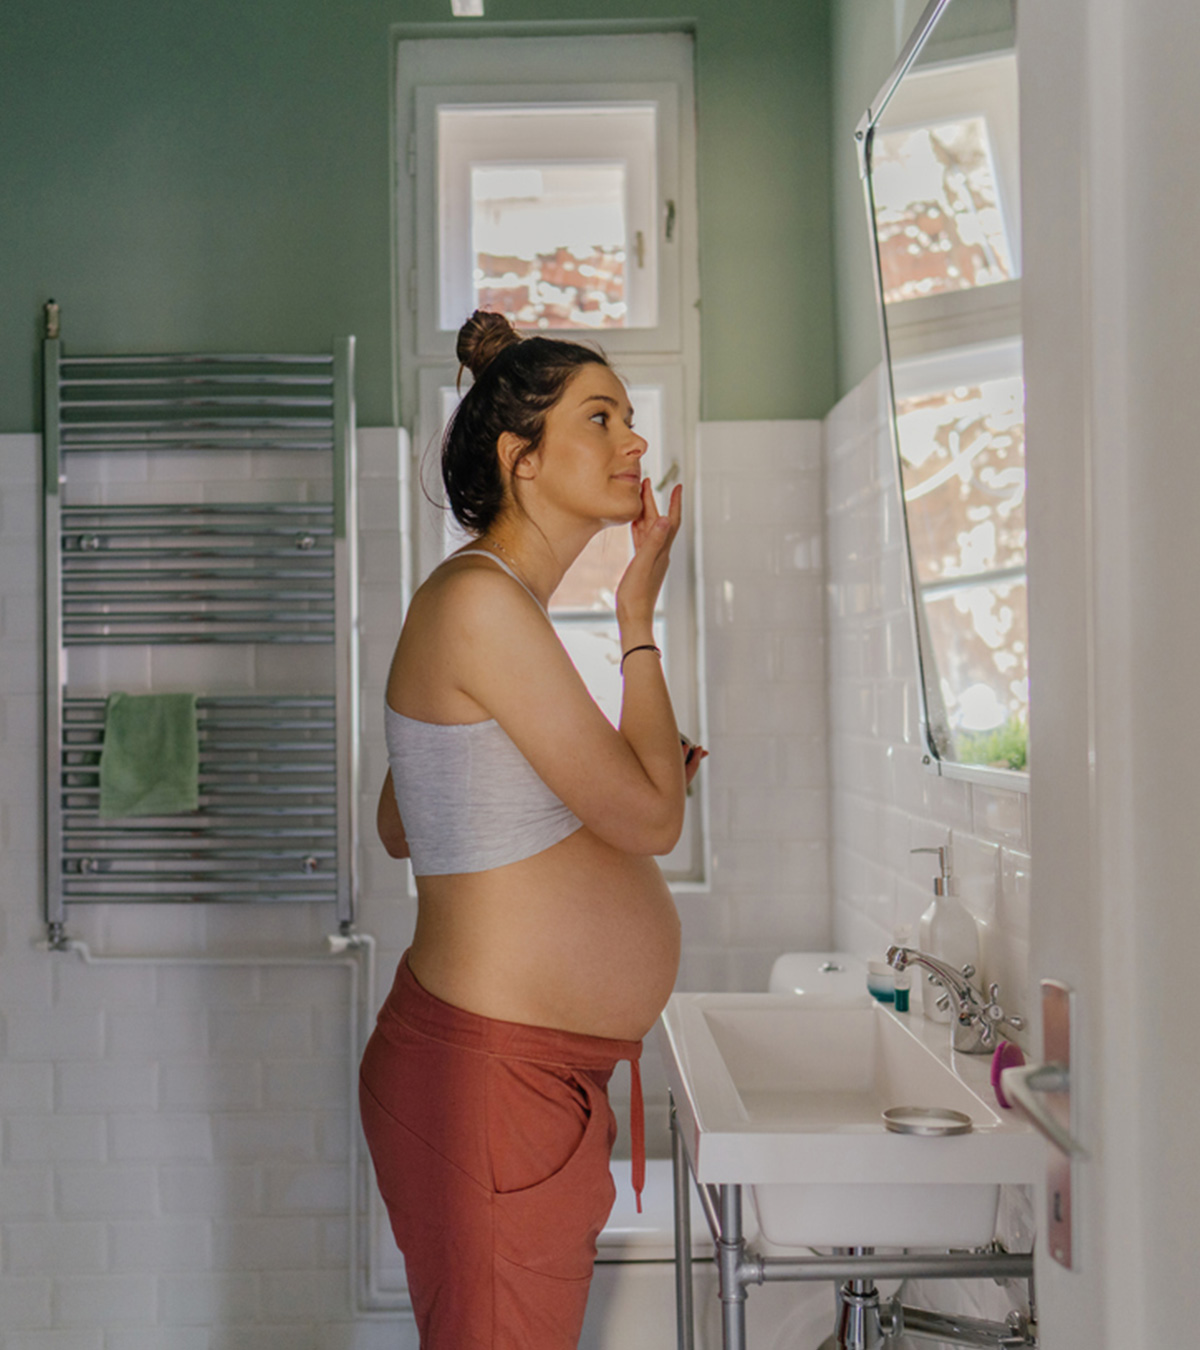 5 Beauty Treatments You Should Avoid When You’re Expecting